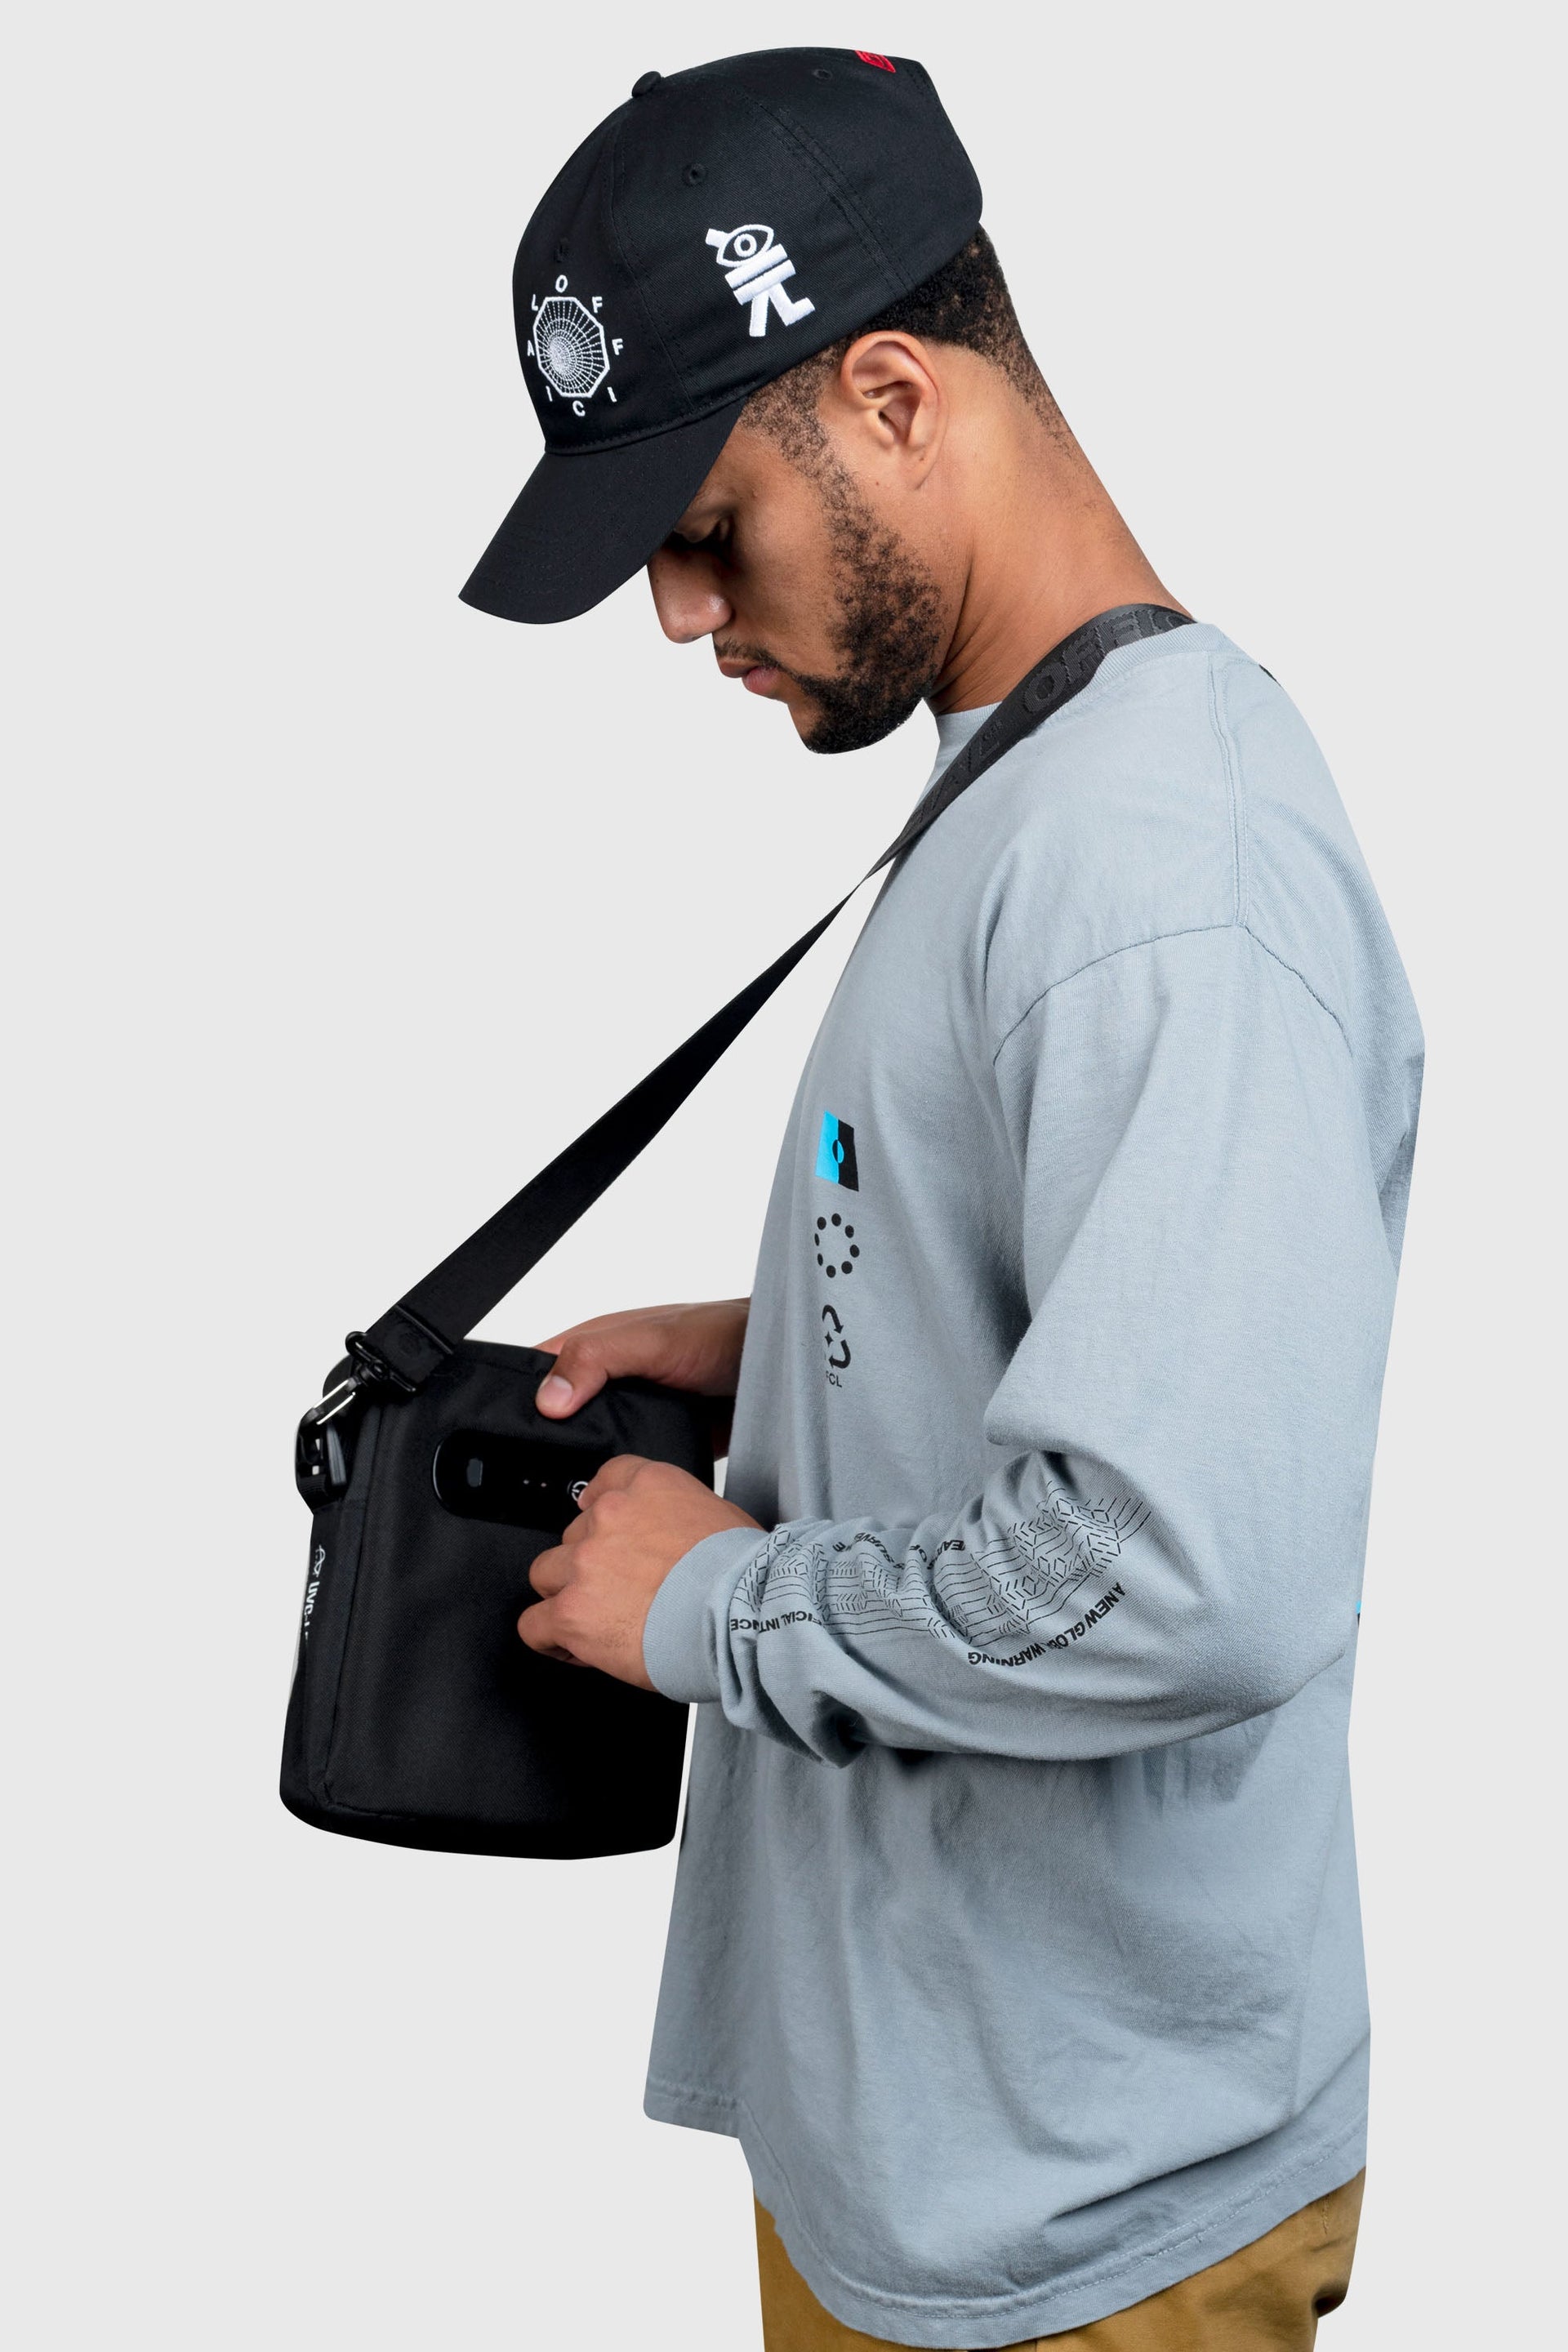 The controls on the UVC Sterilization Shoulder Bag Streetwear | Official Black being used